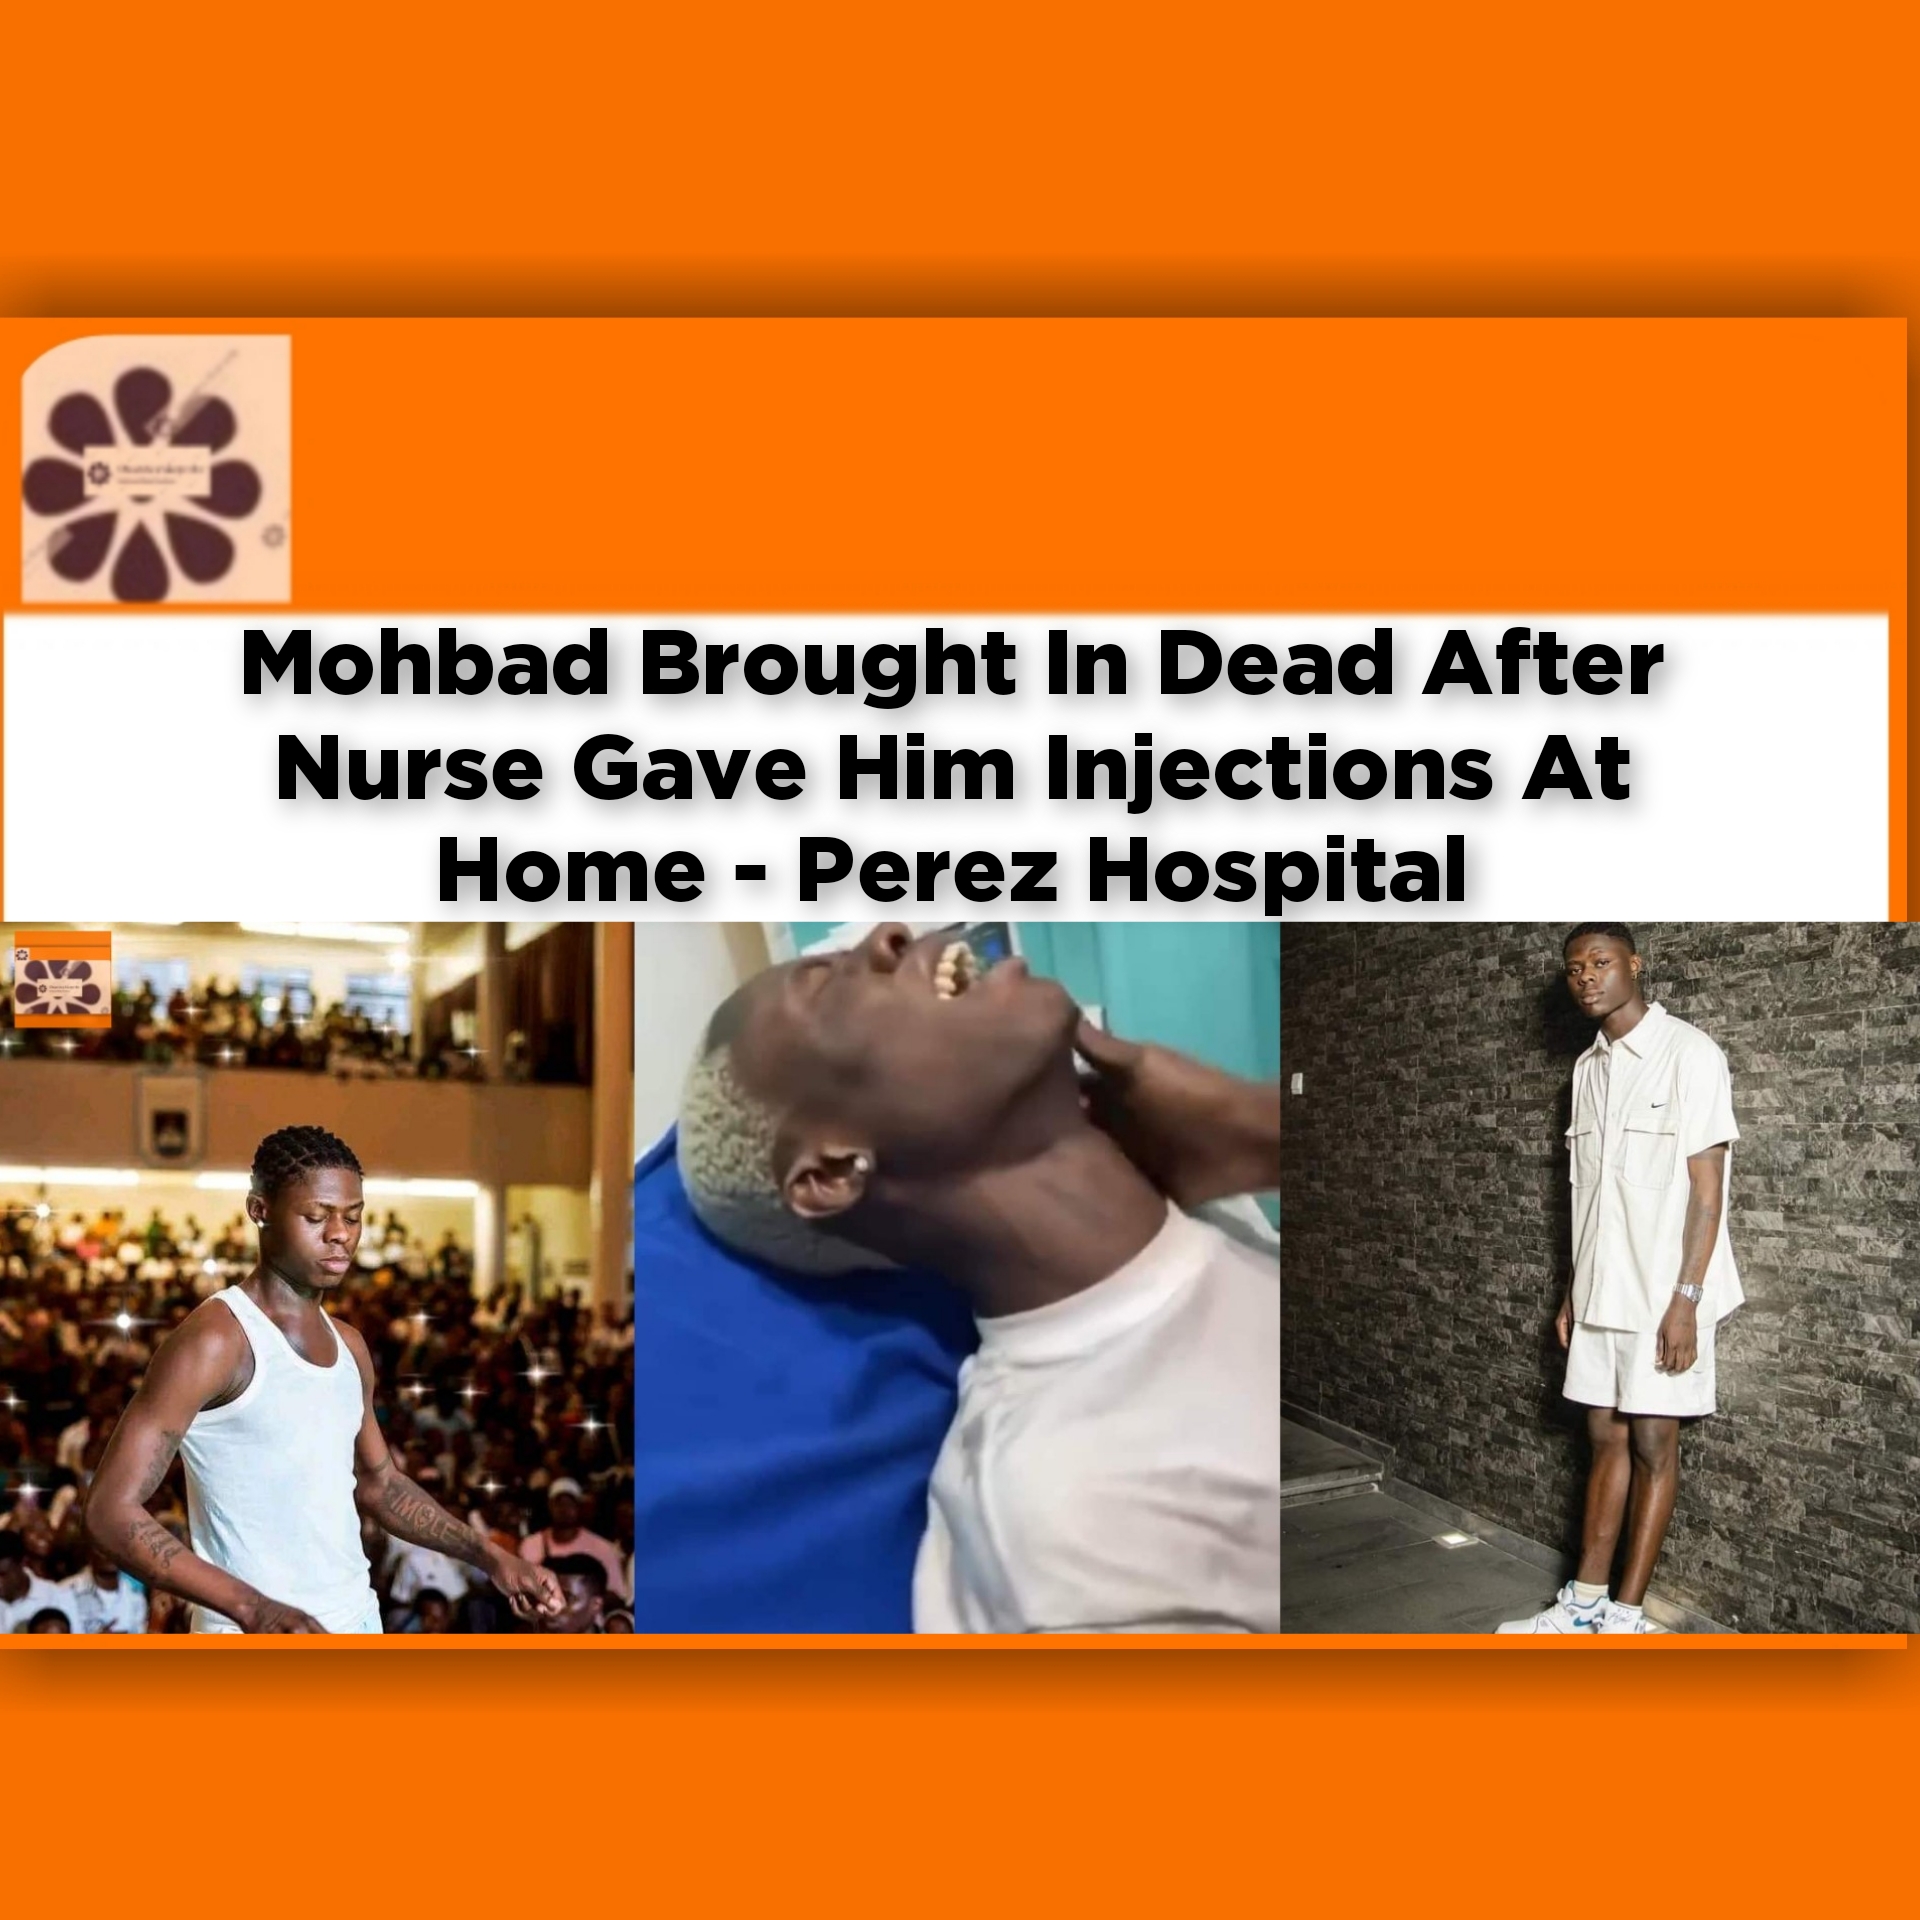 Mohbad Brought In Dead After Nurse Gave Him Injections At Home - Perez Hospital ~ OsazuwaAkonedo #Ondo